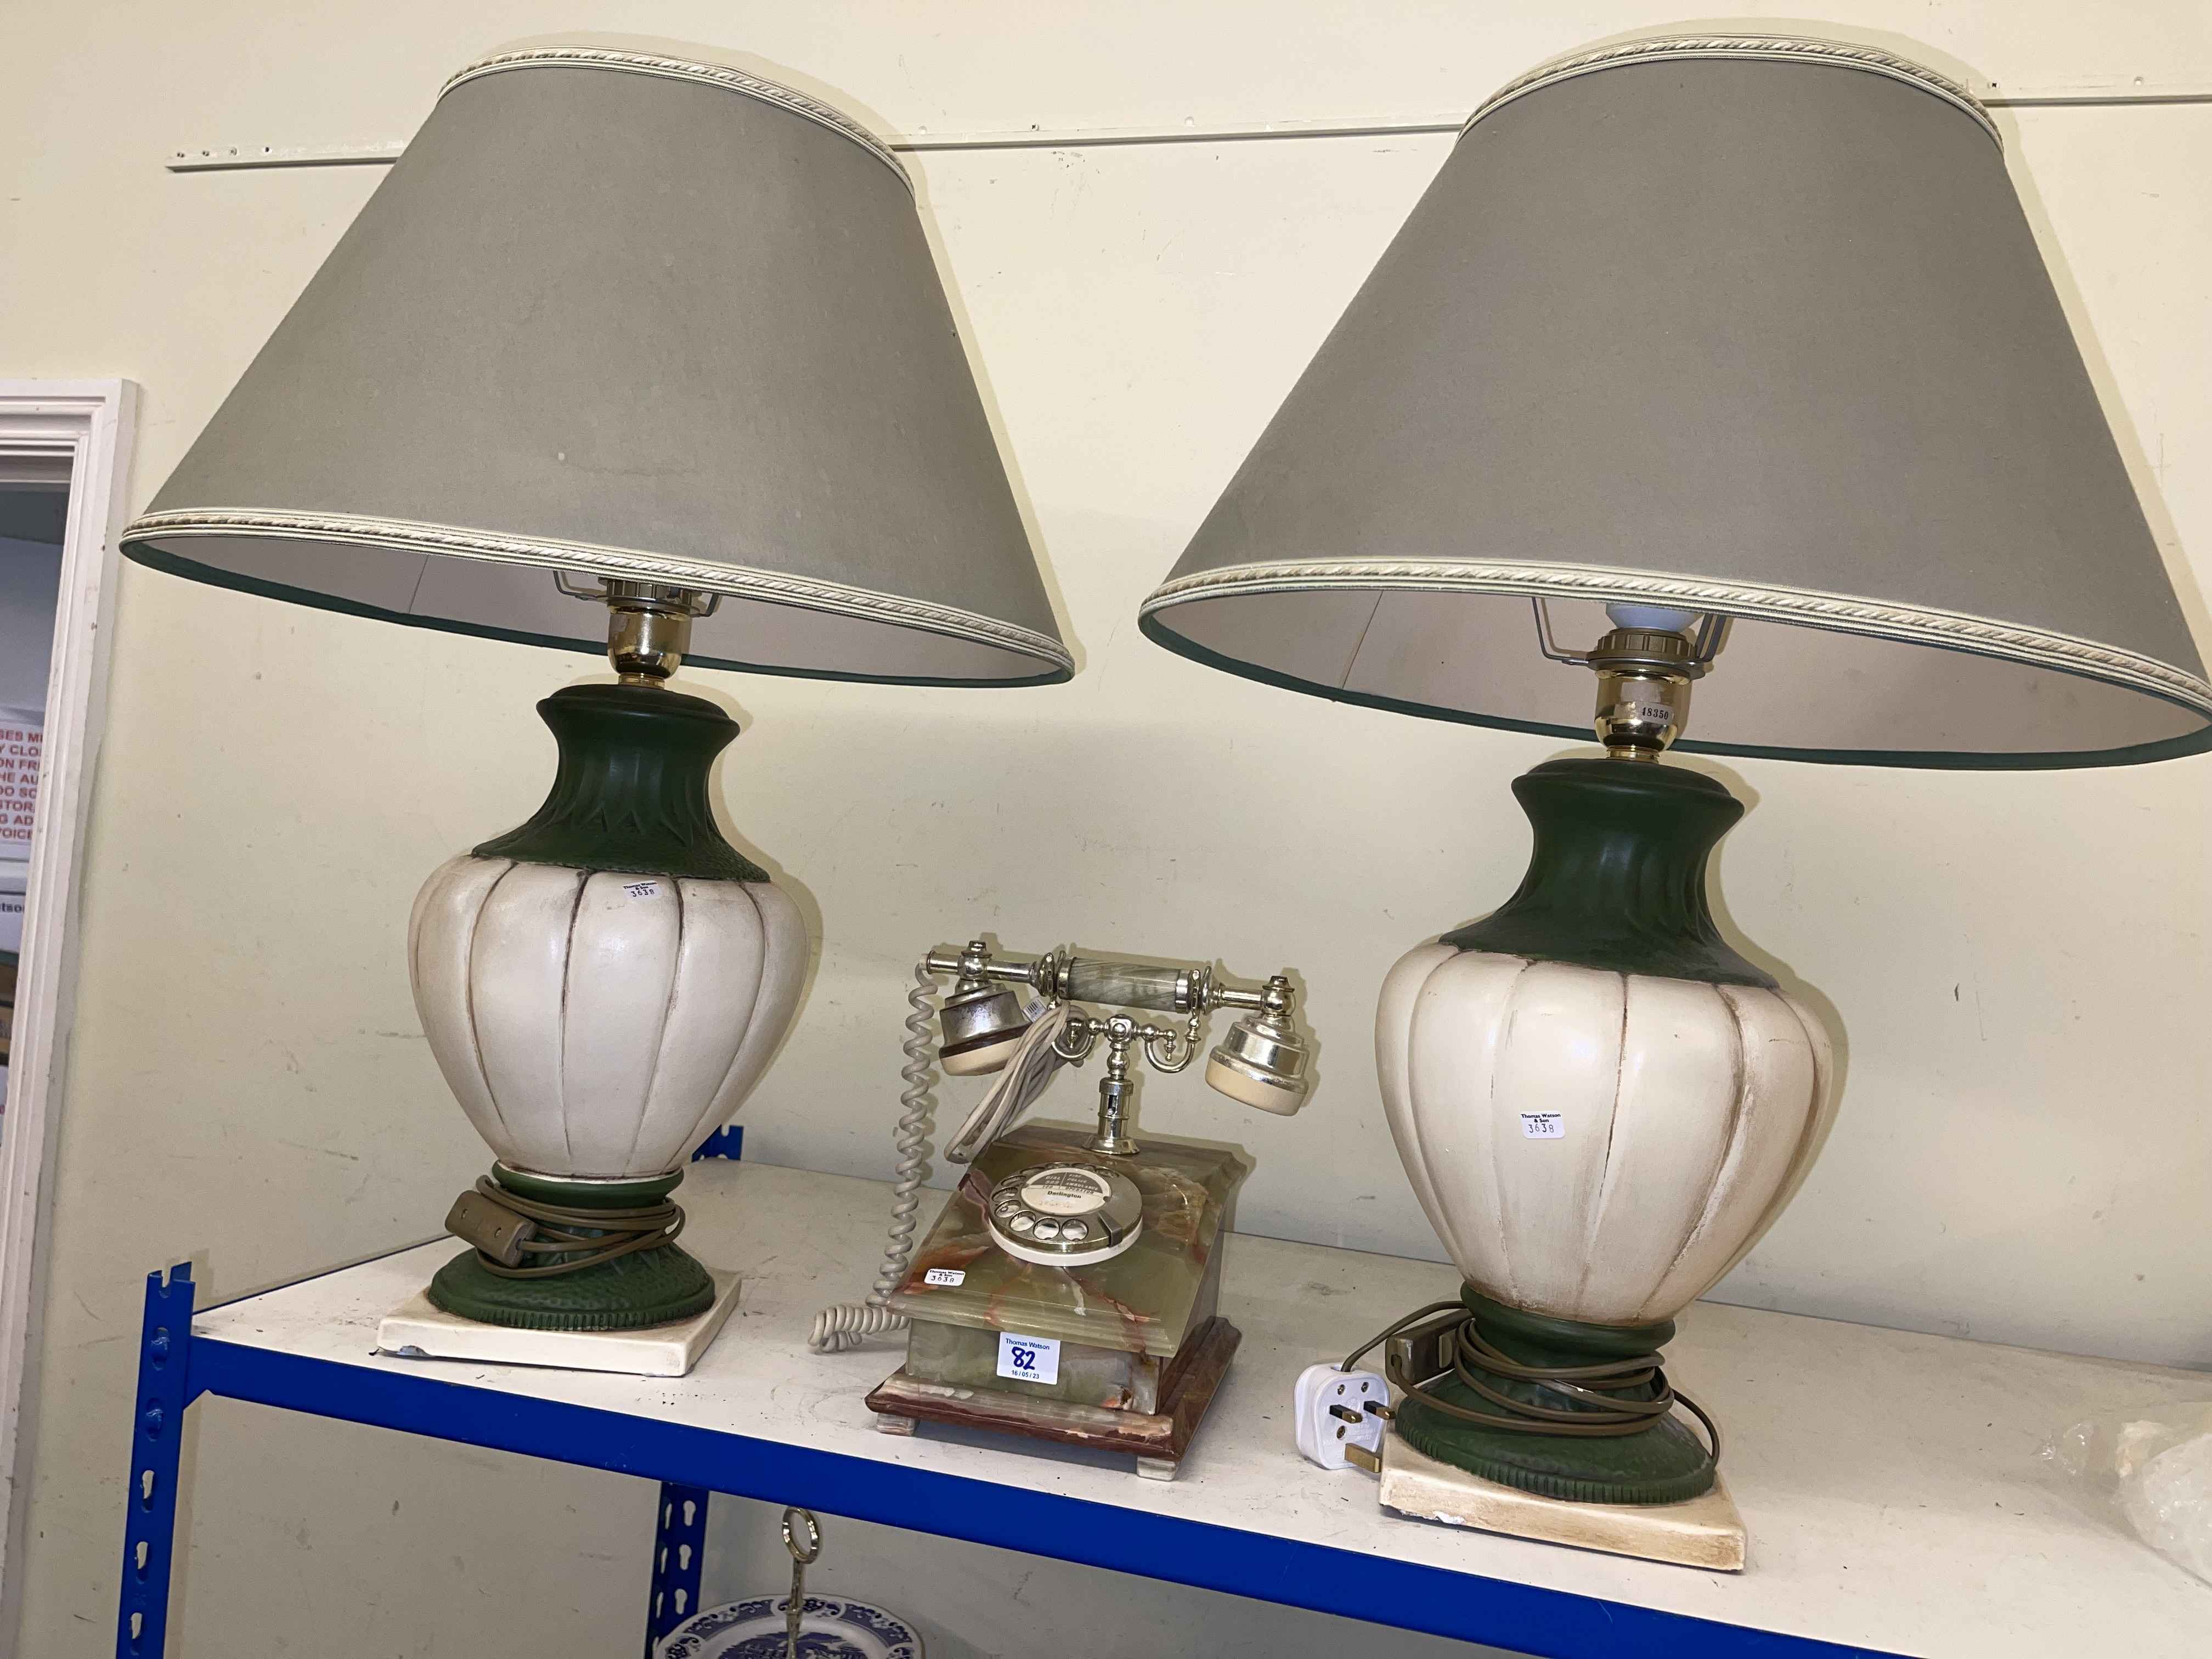 Pair of pottery table lamps and shades, onyx telephone, Spode blue and white Italian tableware. - Image 2 of 2